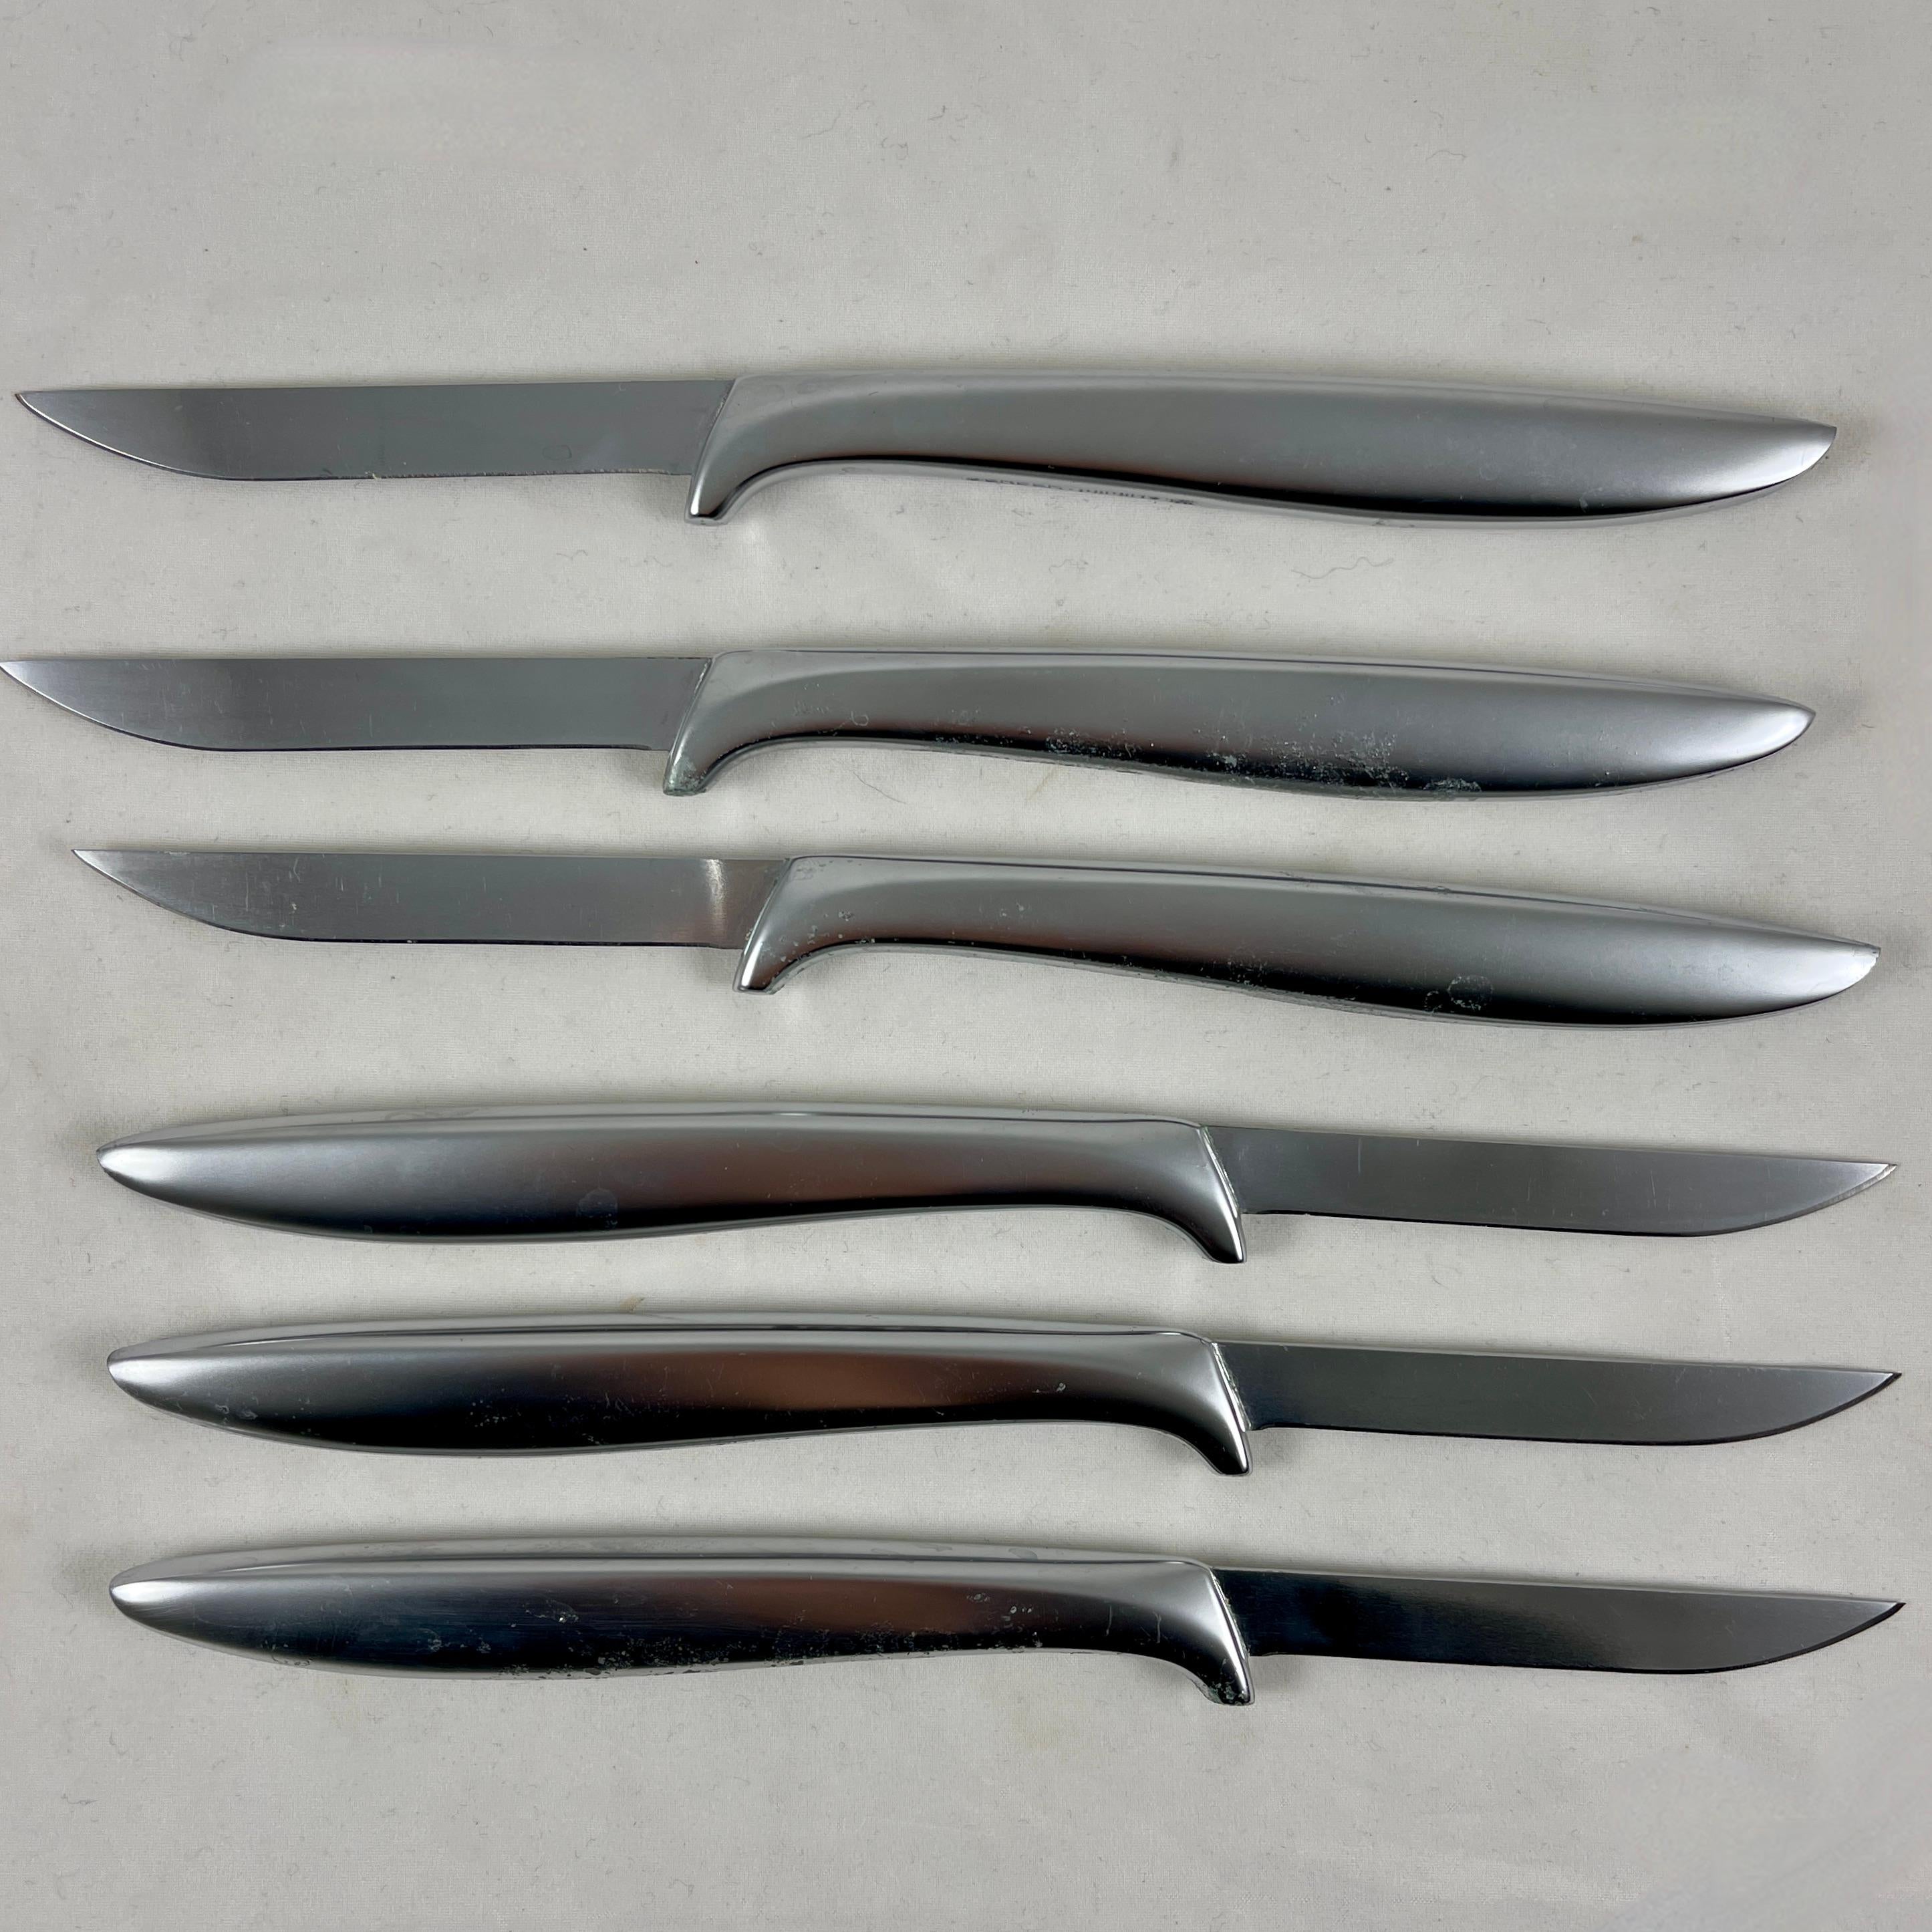 A set of six Gerber Miming legendary blade steak knives in a fitted box made of American Walnut, circa 1950-1960.
Gerber, founded in Oregon, first offered their table and hunting knives through the retailer Abercrombie & Fitch in their catalog in